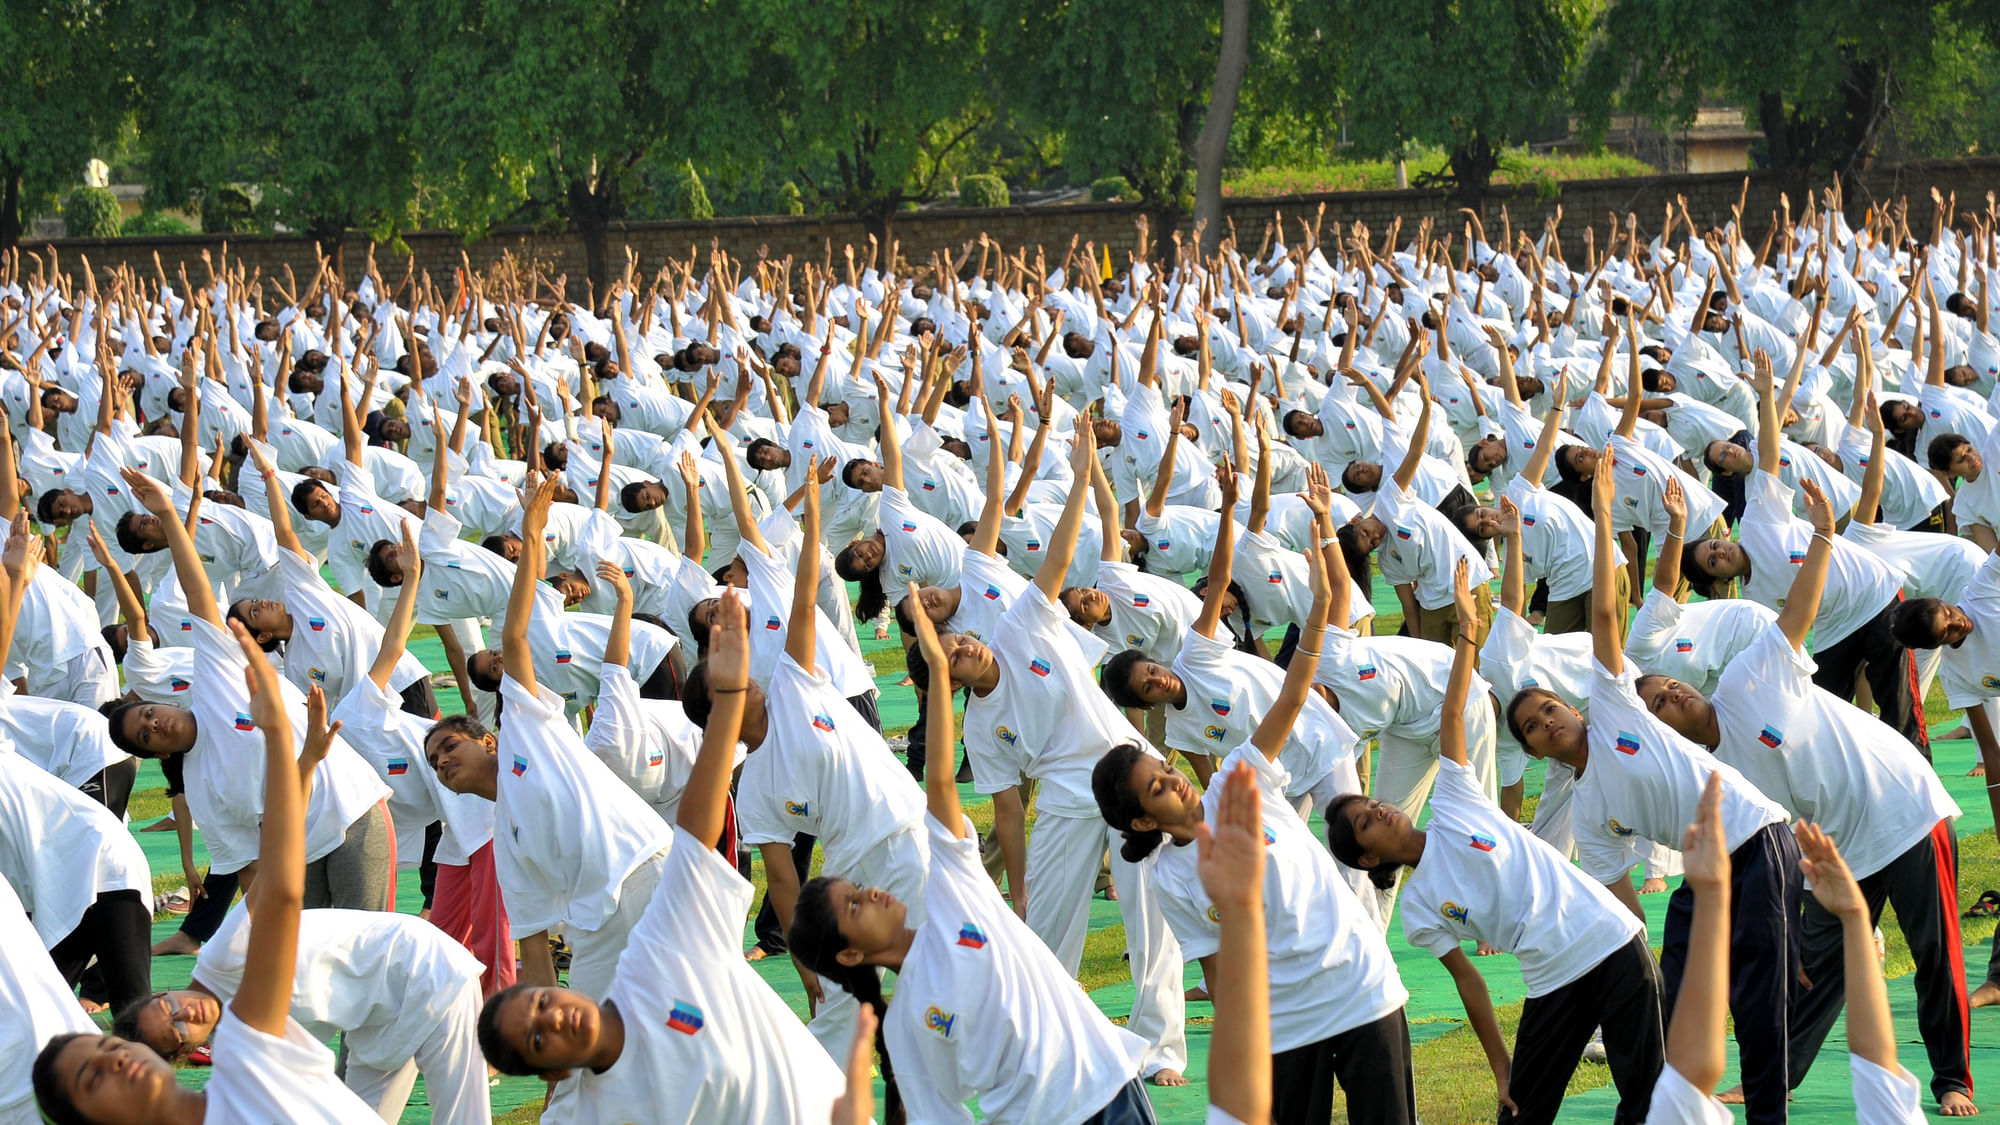 NCC students in Jaipur participating in Yoga Day last year. (Photo: IANS)